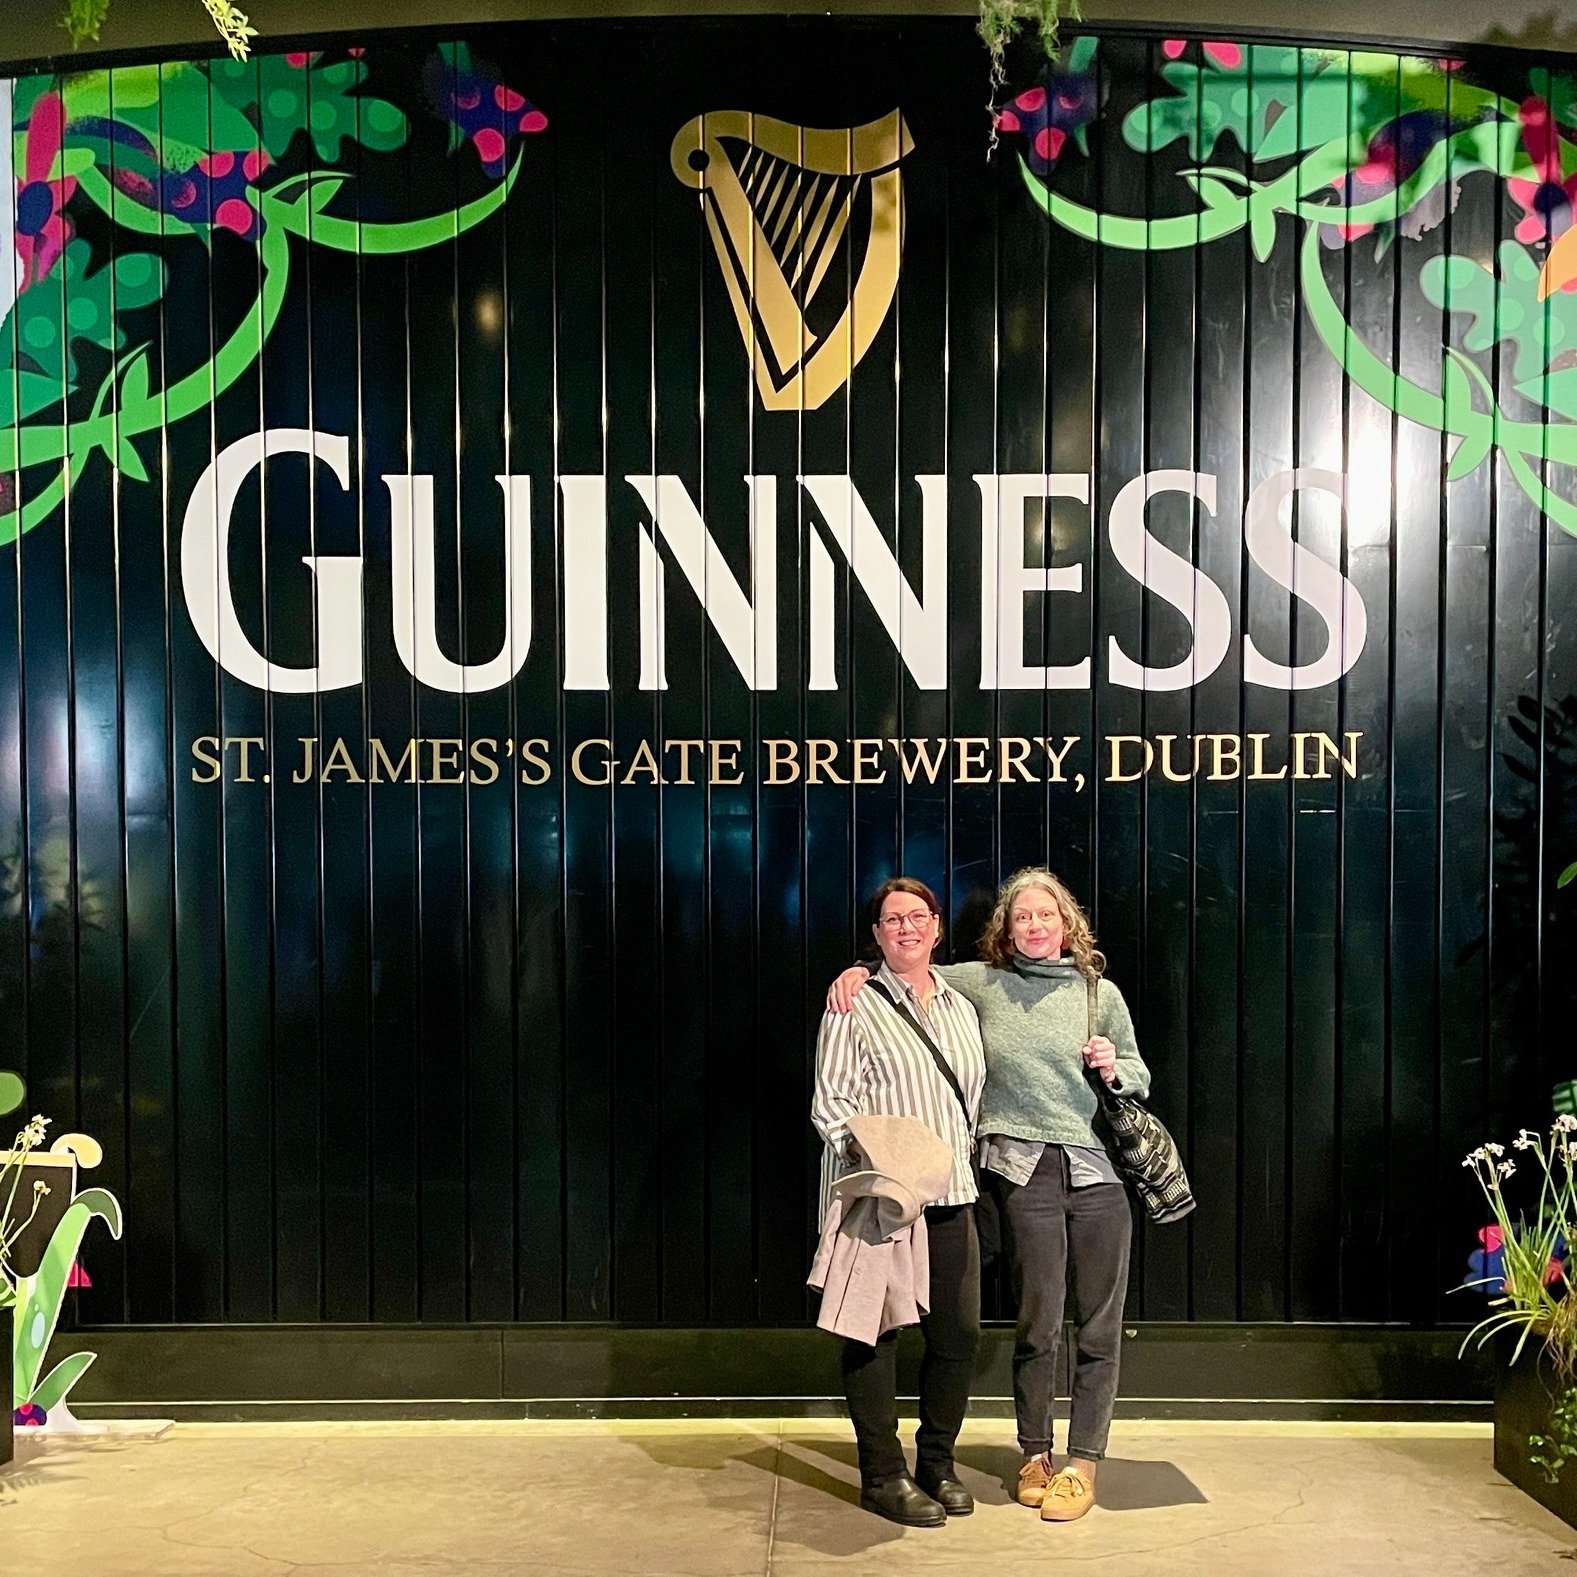 TLDR: Our Tour of Ireland was absolutely magical! 🍀

In early April, we embarked on our first international retreat/tour in partnership with @knittingtours and Irish Tourism. Alongside our group of 22 intrepid knitters and a few non-knitting partner